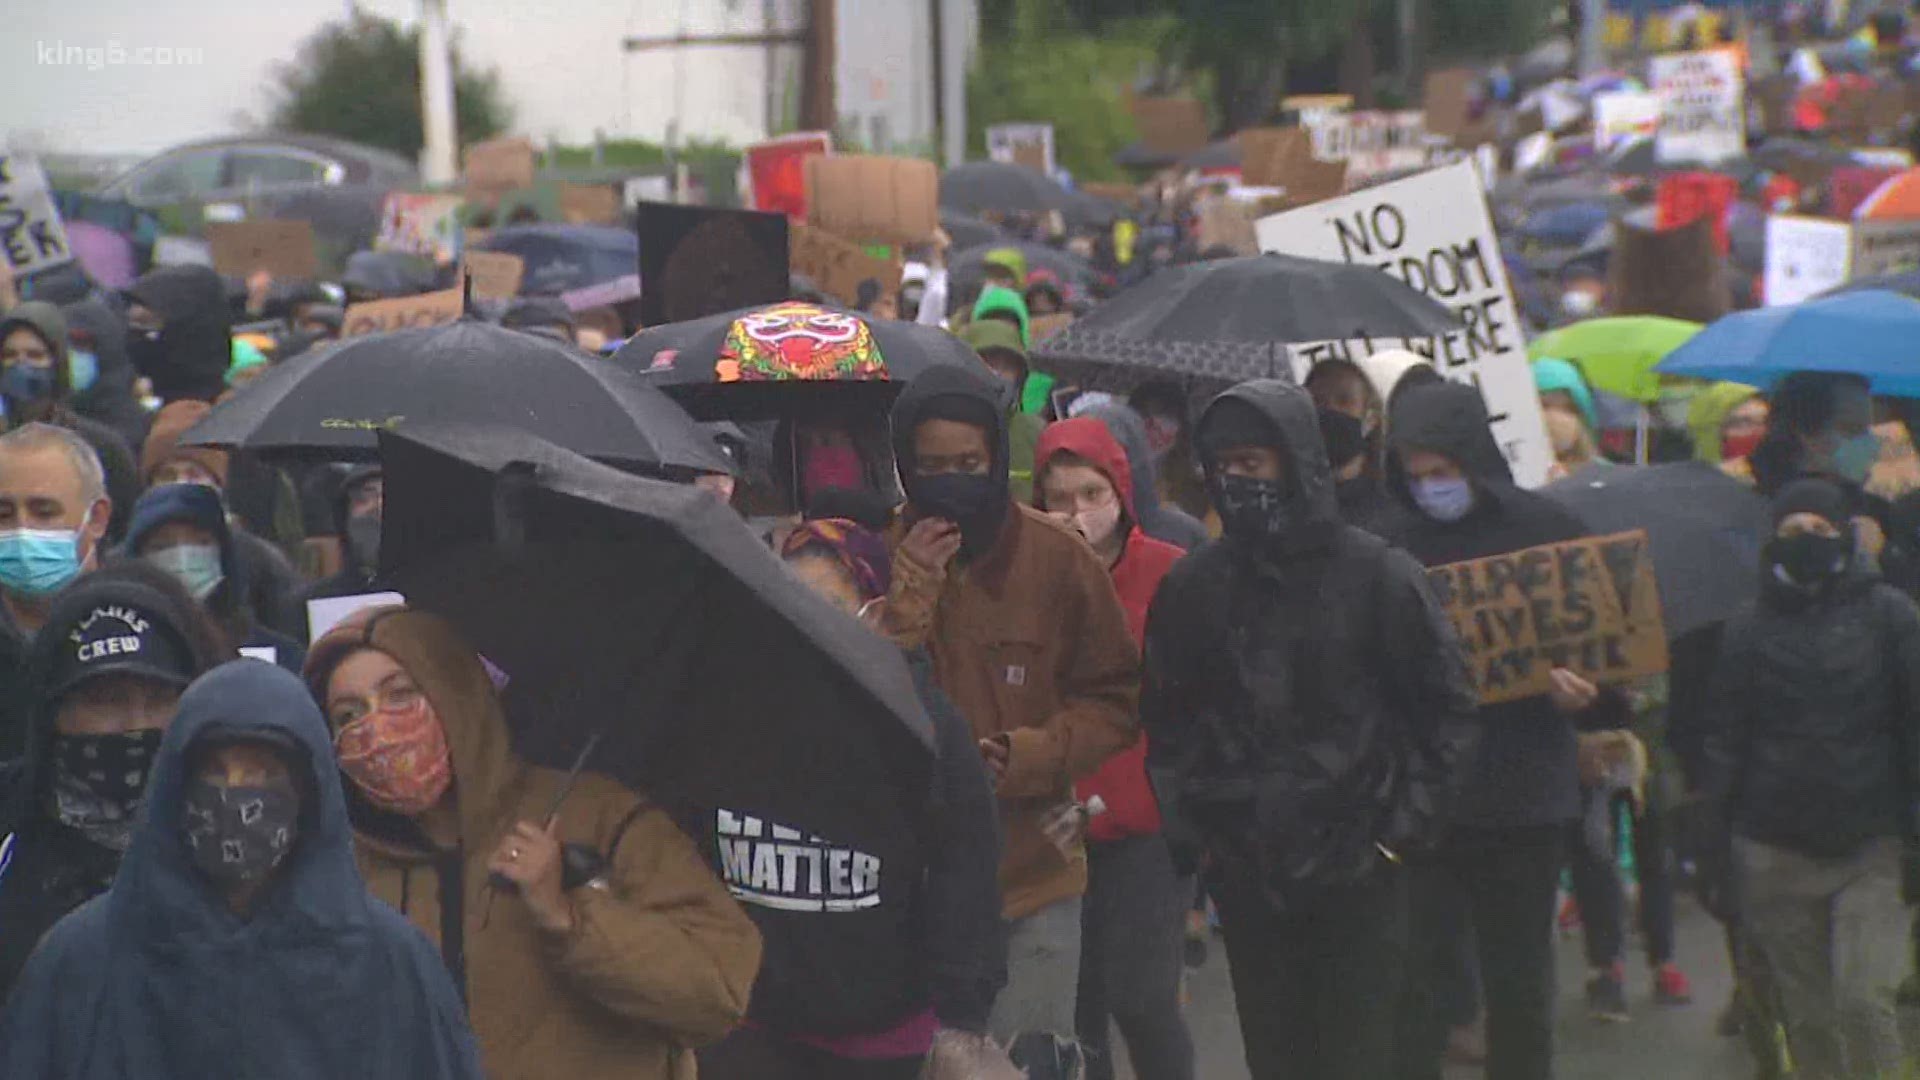 Leaders with Black Lives Matter Seattle-King County organized a silent march and strike on Friday, where about 60,000 people attended to show their support.